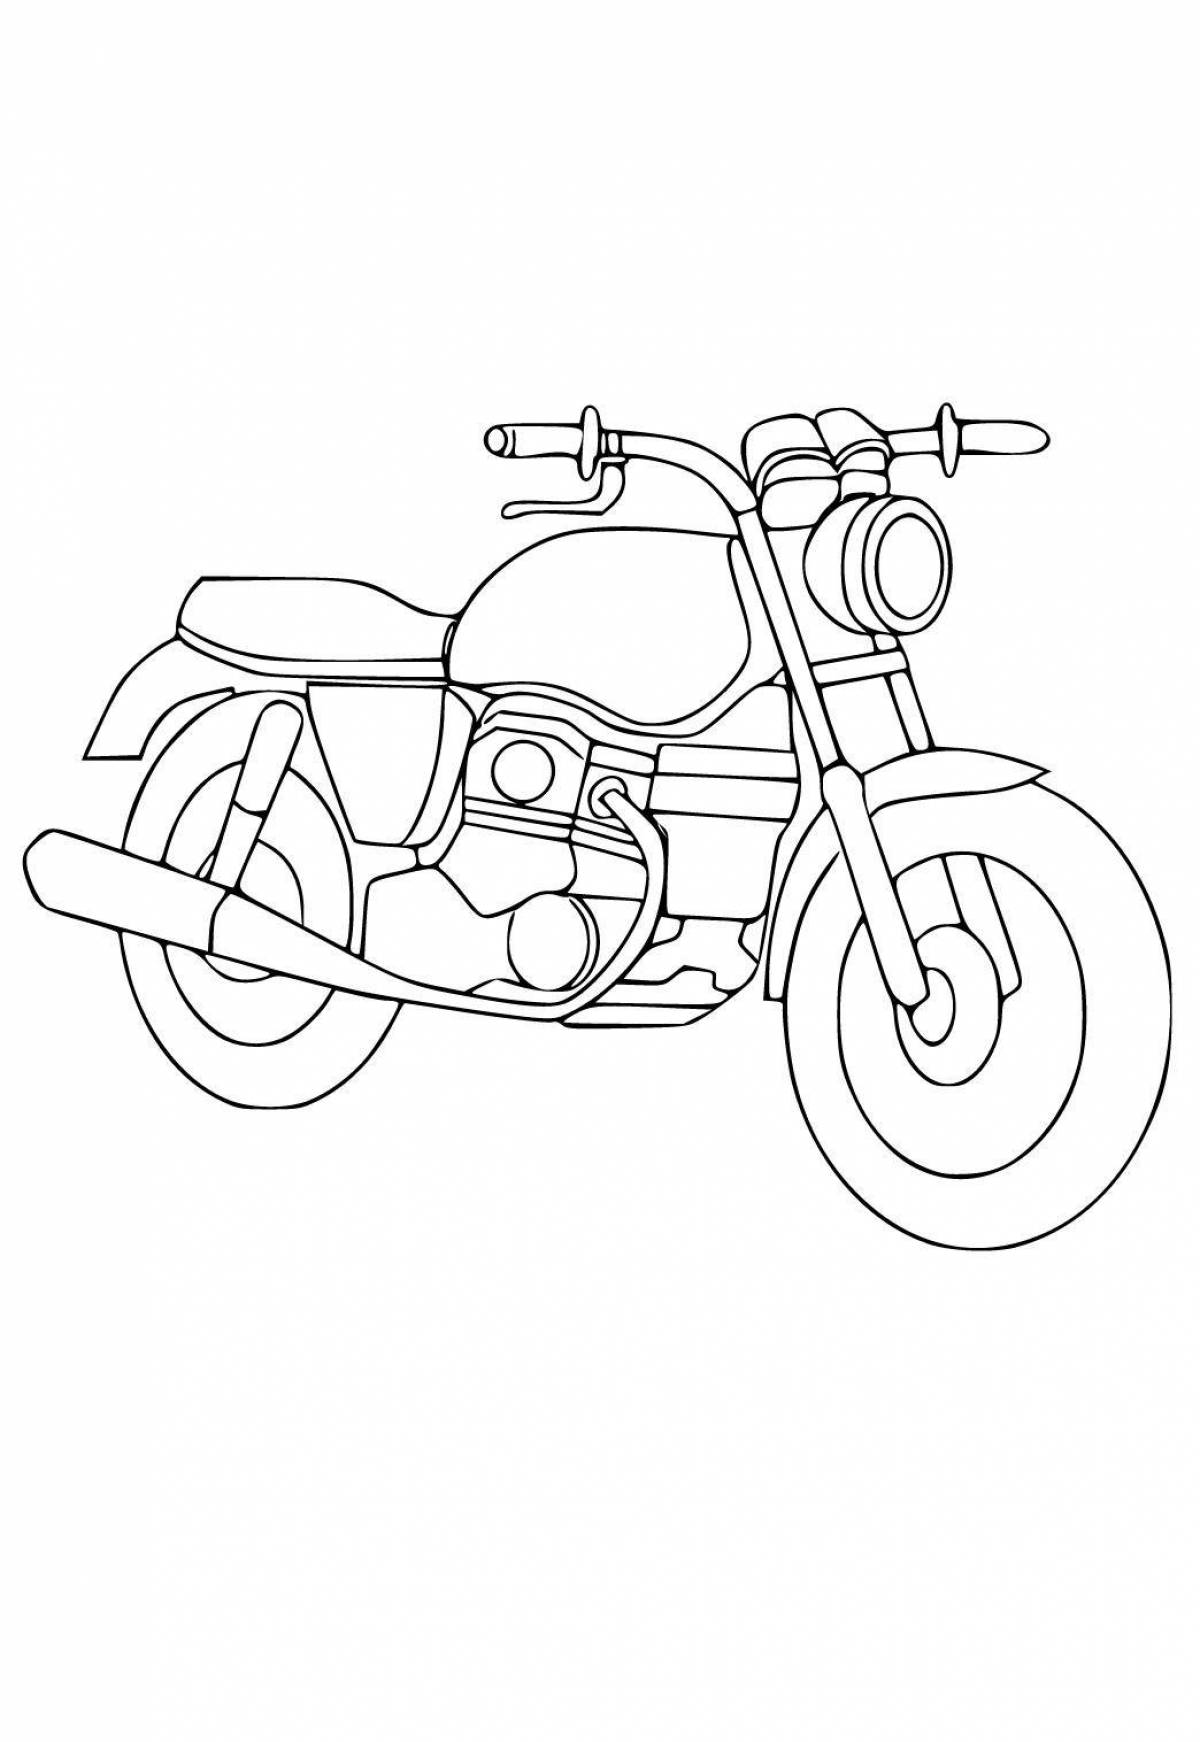 Fabulous coloring of motorcycles for children 3-4 years old